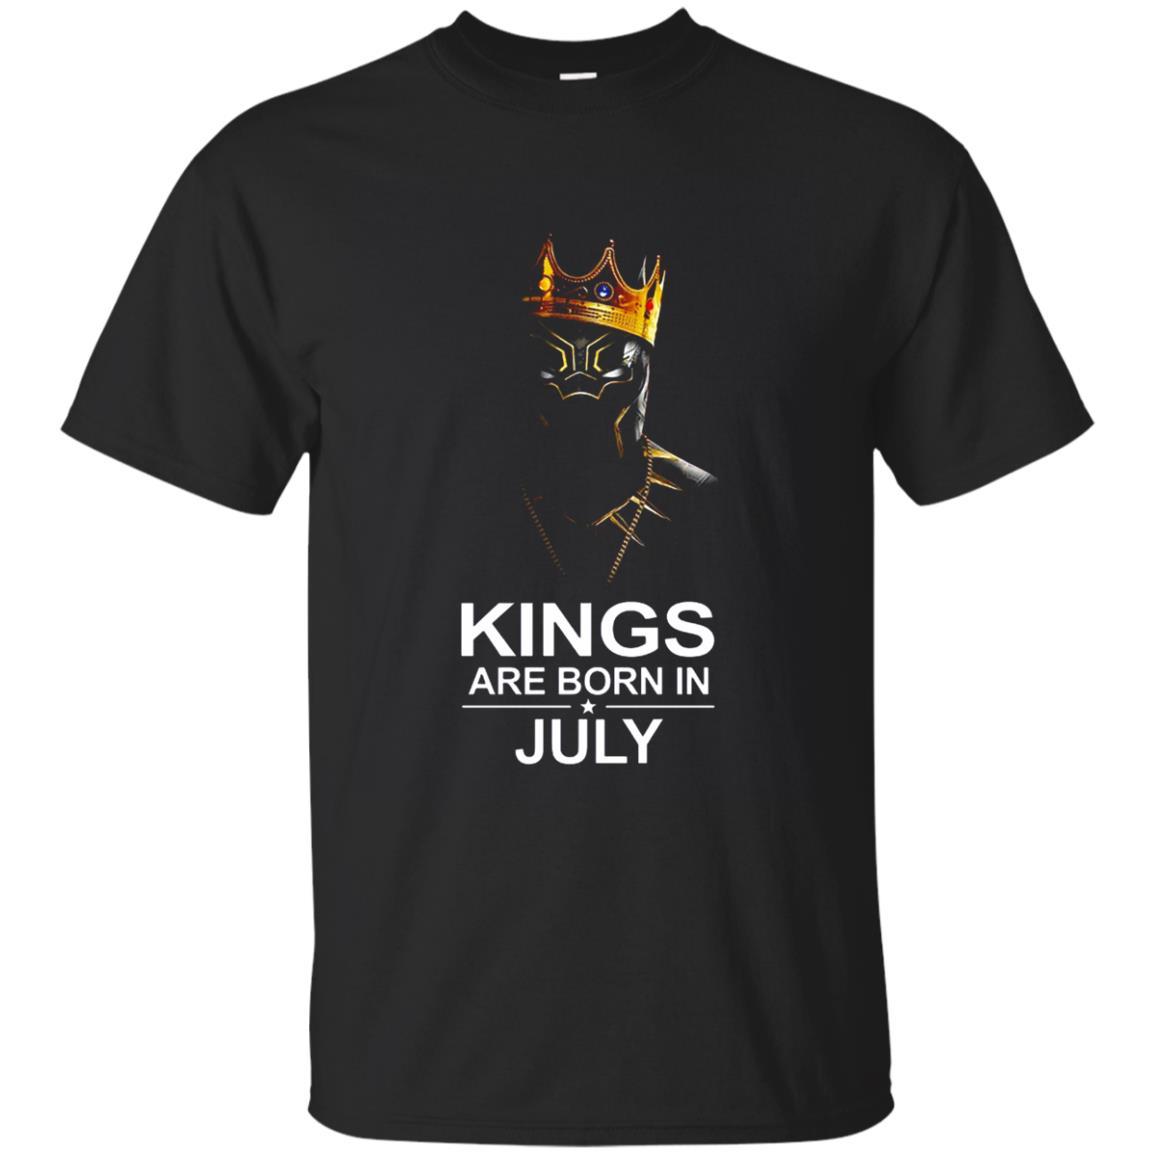 Black Panther Kings Are Born In July Shirts